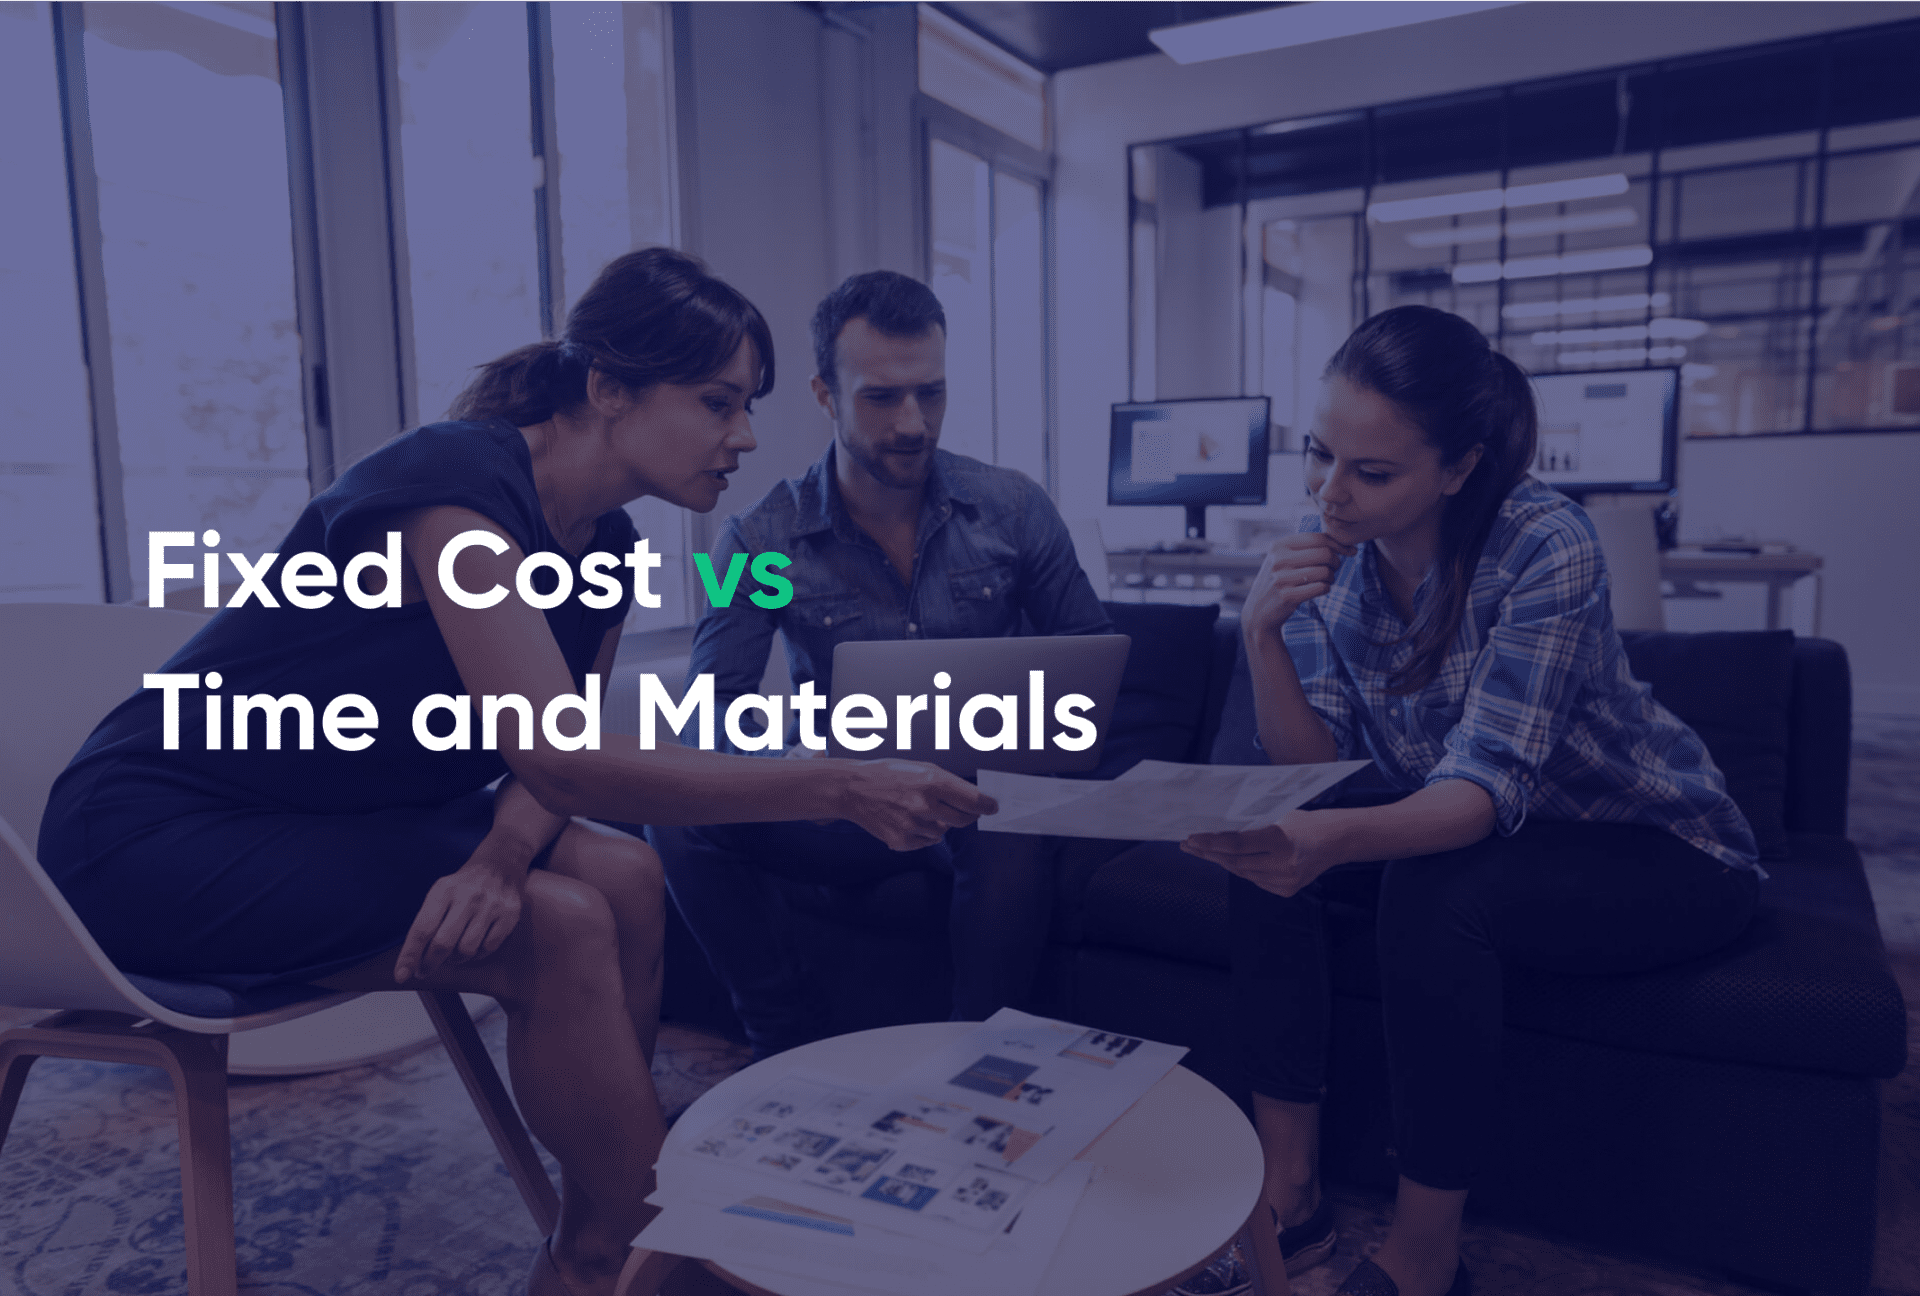 Fixed Cost vs Time and Materials